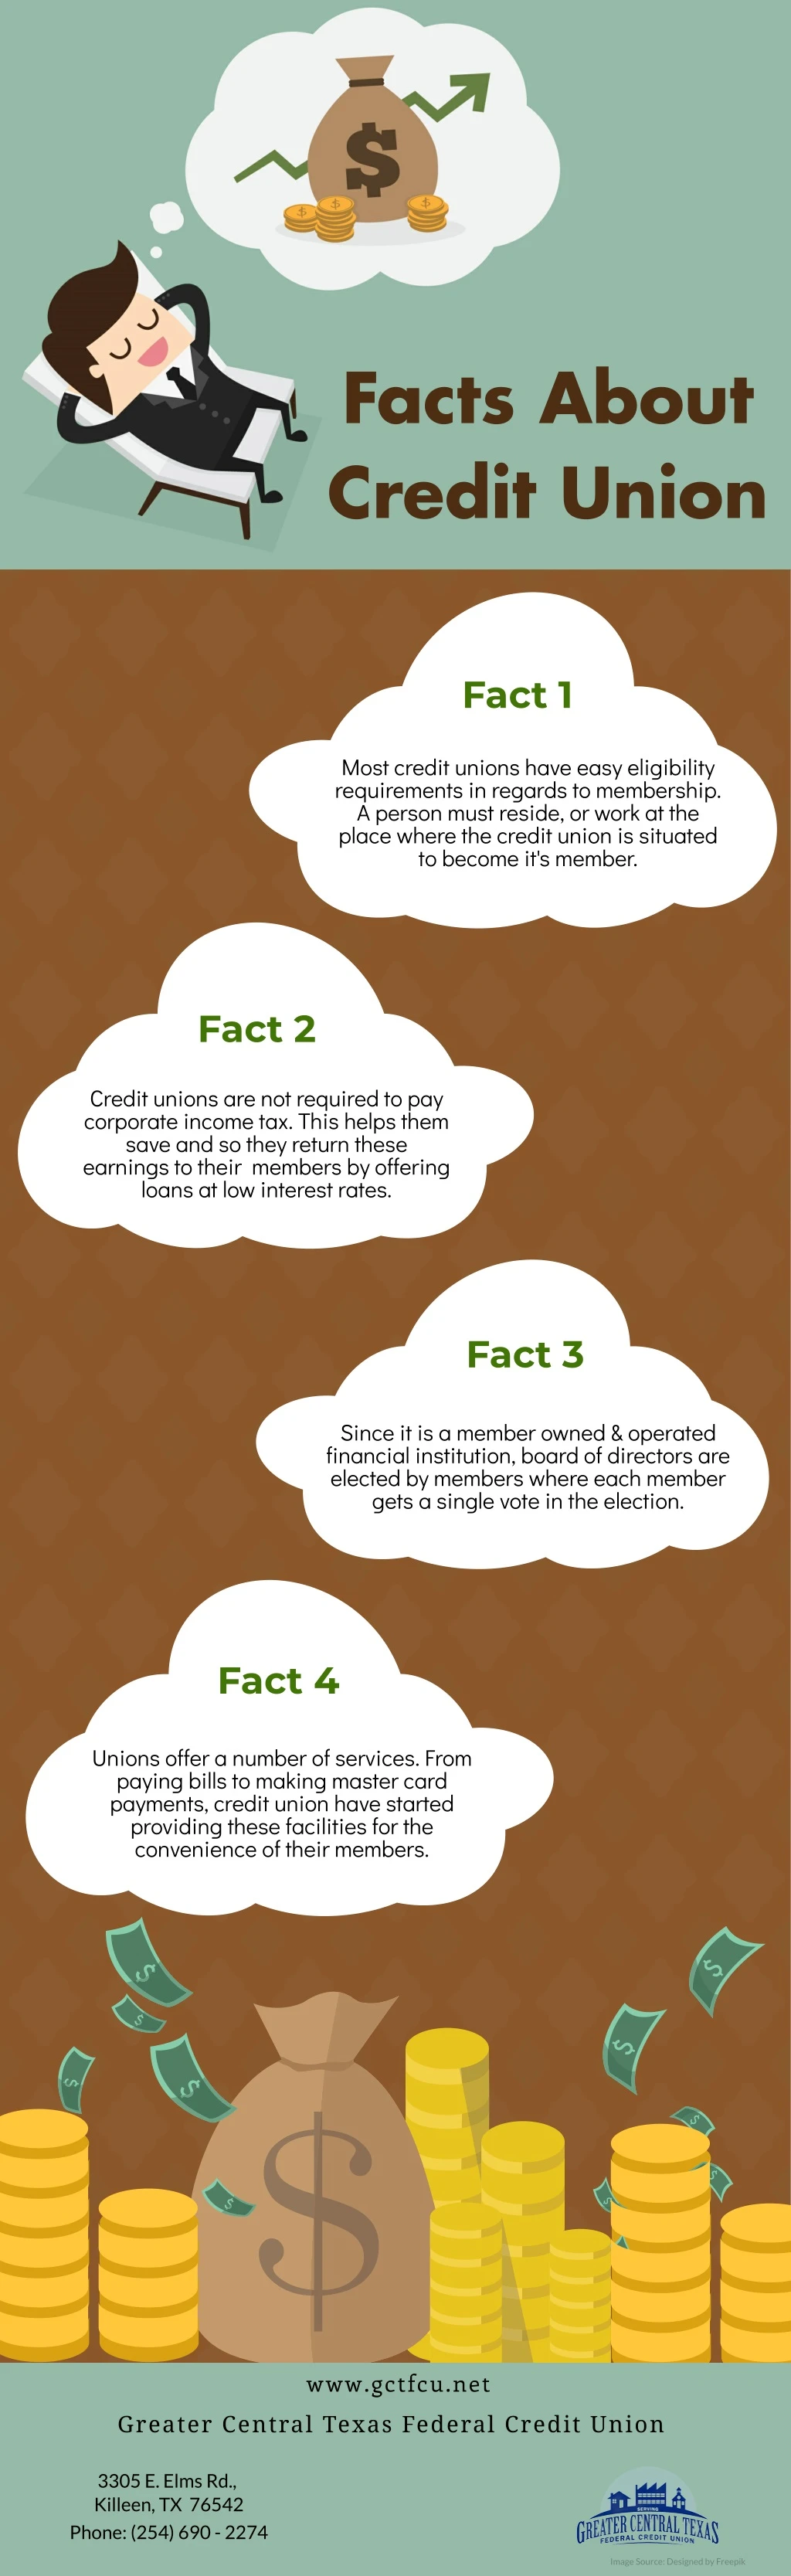 facts about credit union